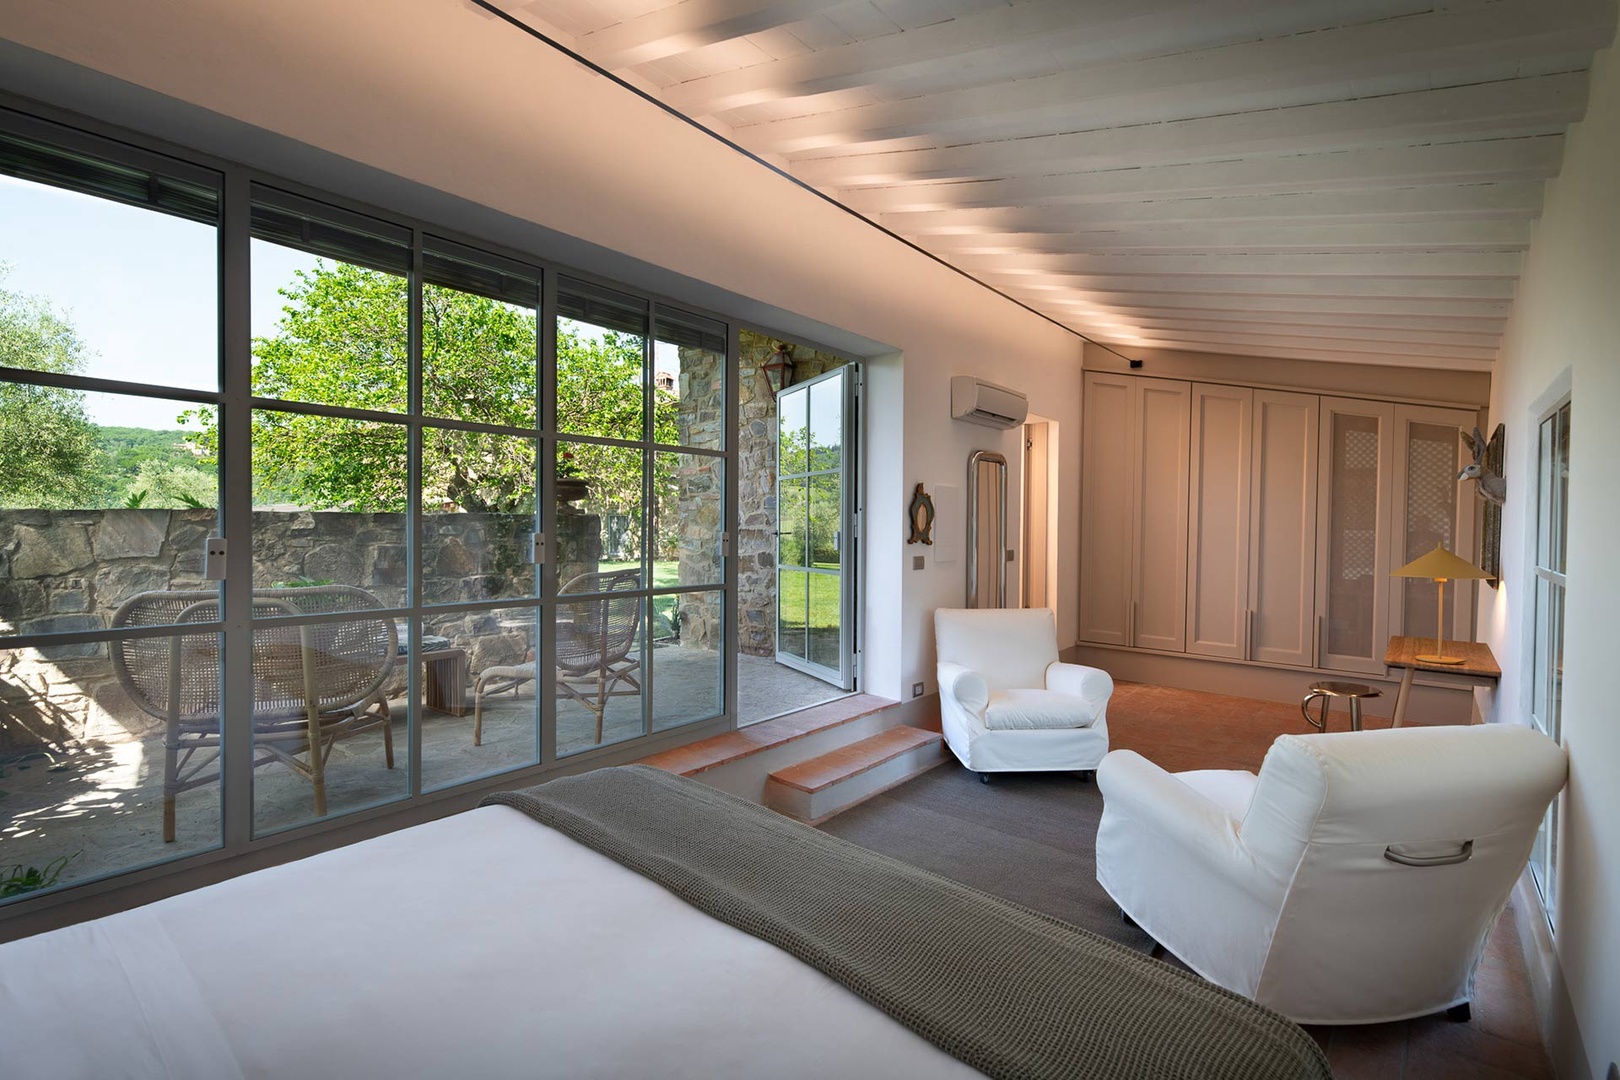 Light filled bedroom opens onto the patio.